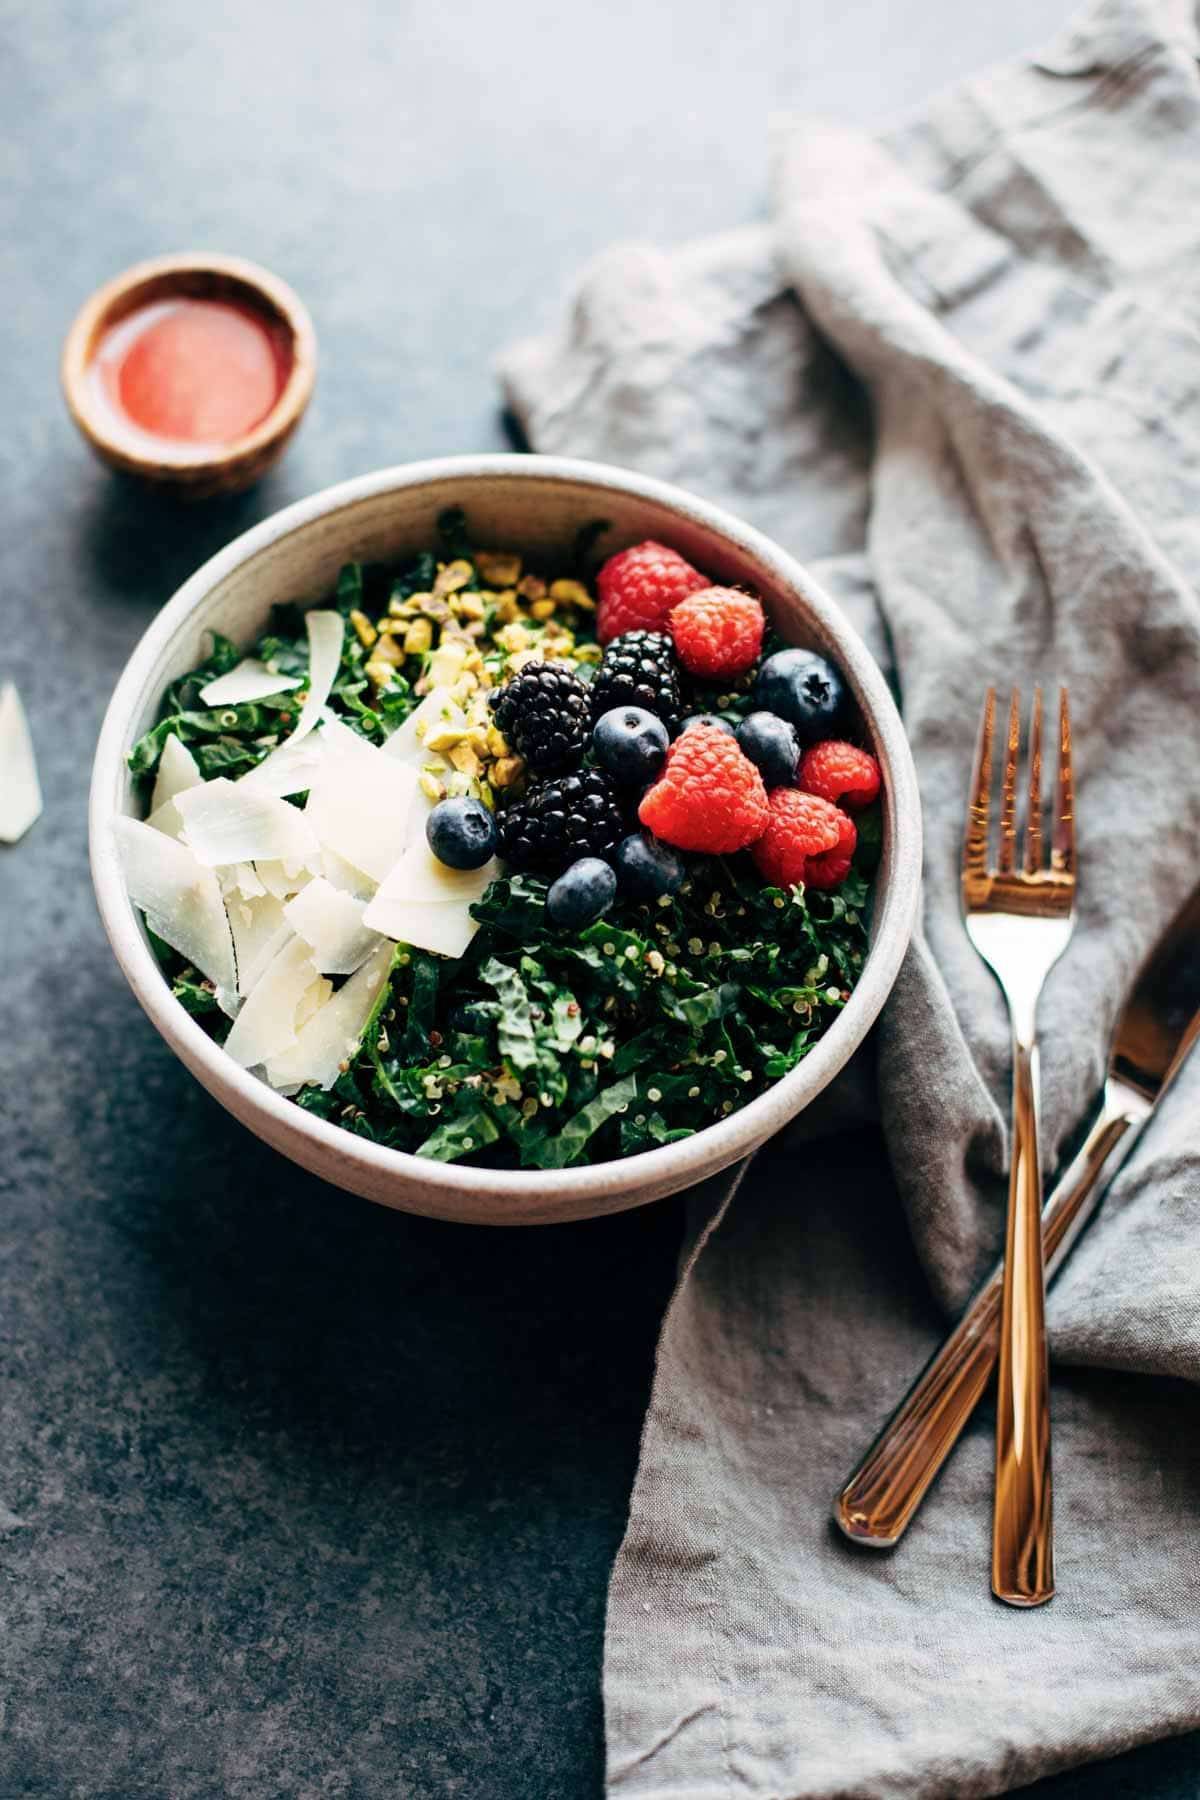 Bowl with greens and berries with fork and knife.